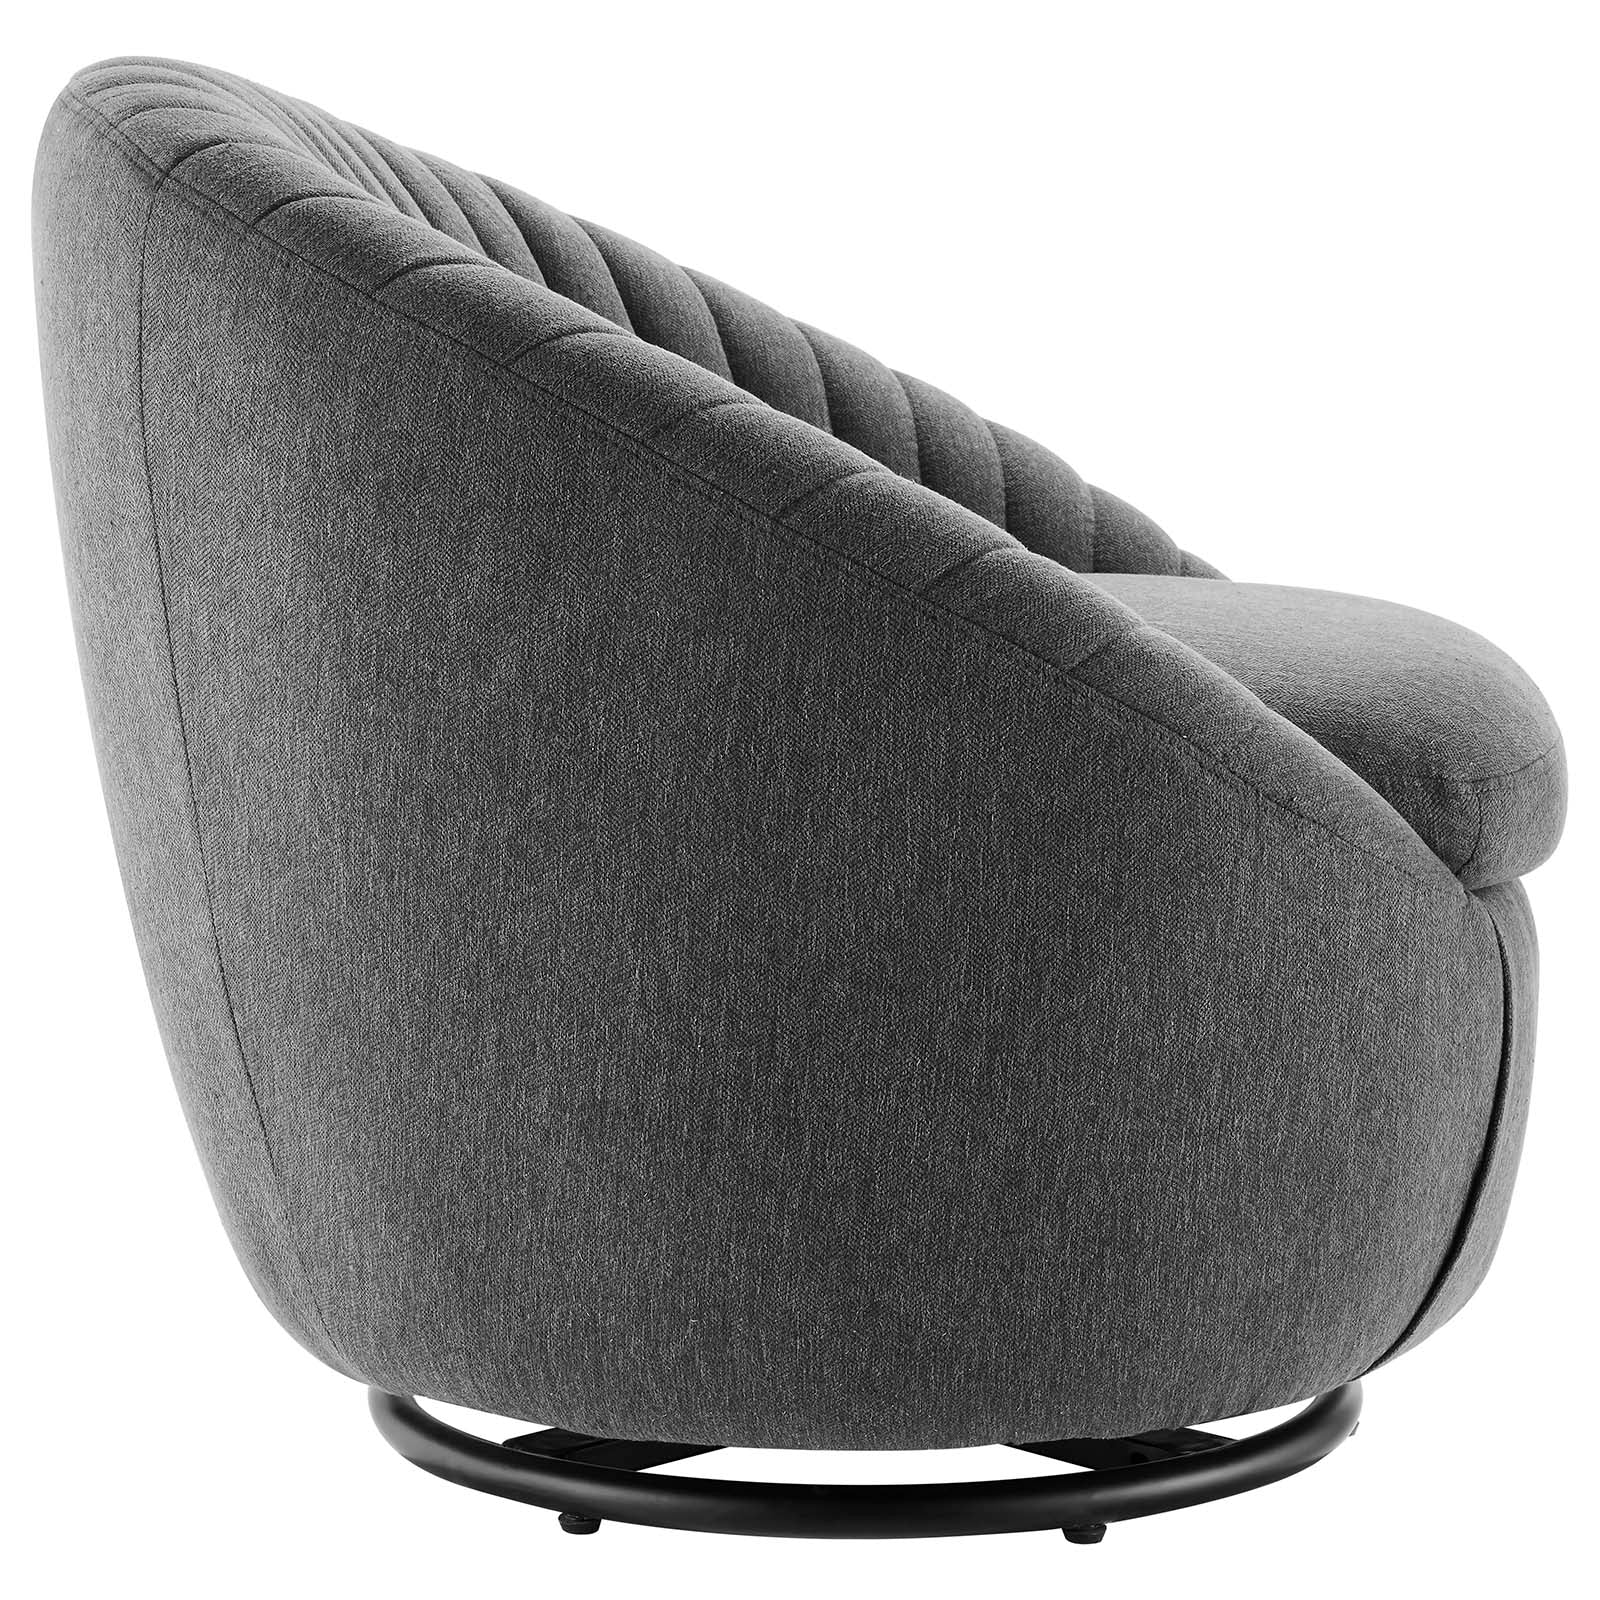 Modway Accent Chairs - Whirr Tufted Fabric Fabric Swivel Chair Black Charcoal